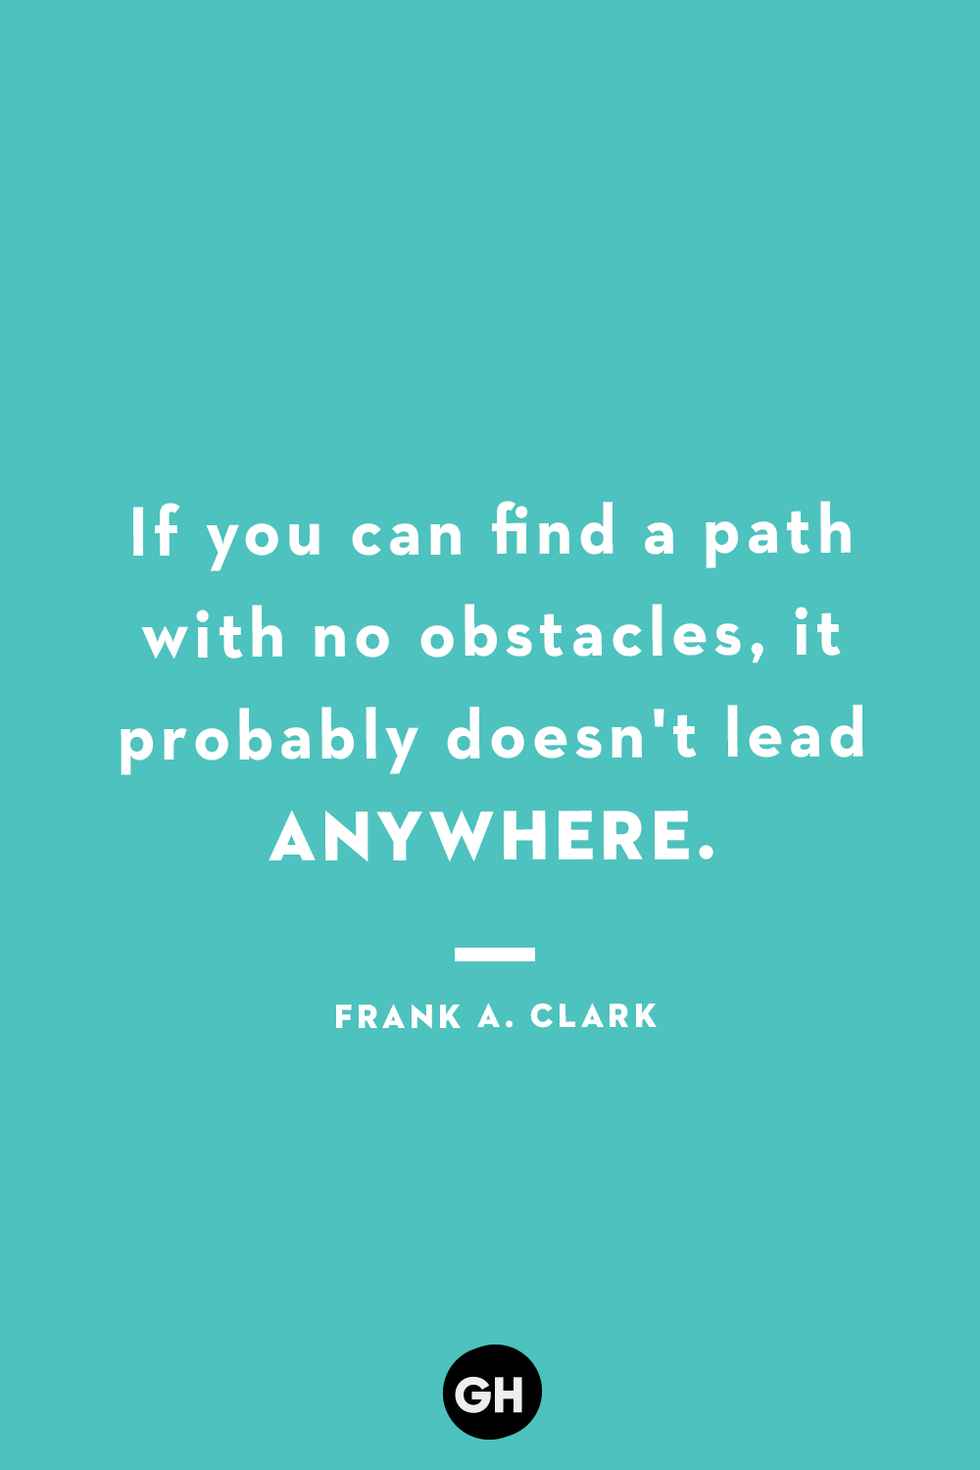 funny graduation quote by frank a clark